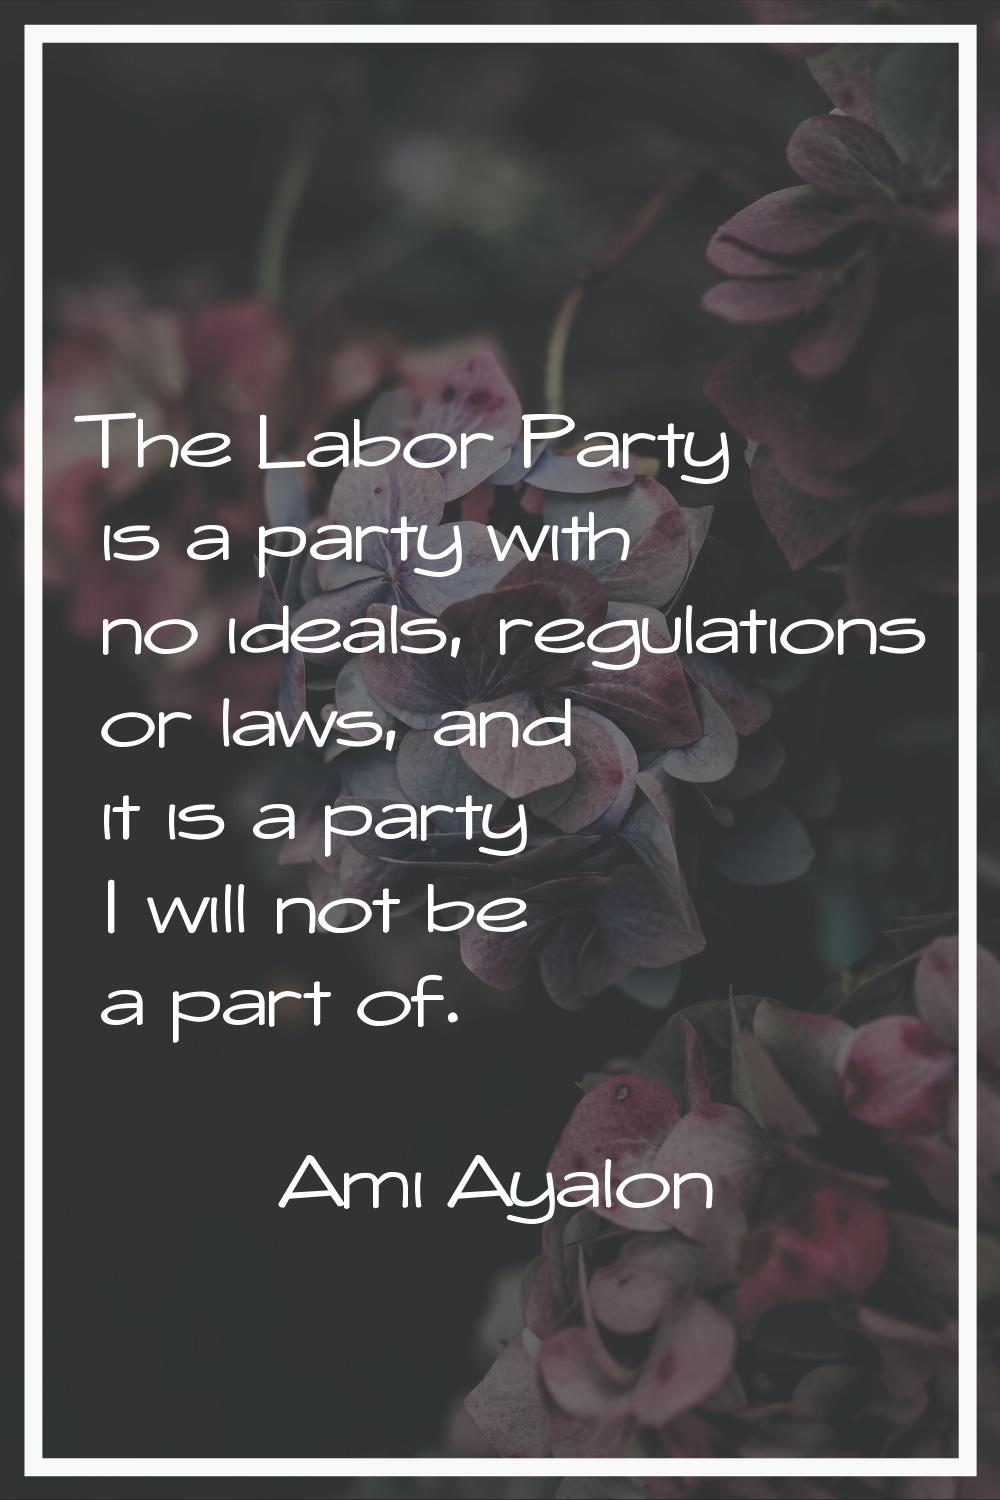 The Labor Party is a party with no ideals, regulations or laws, and it is a party I will not be a p